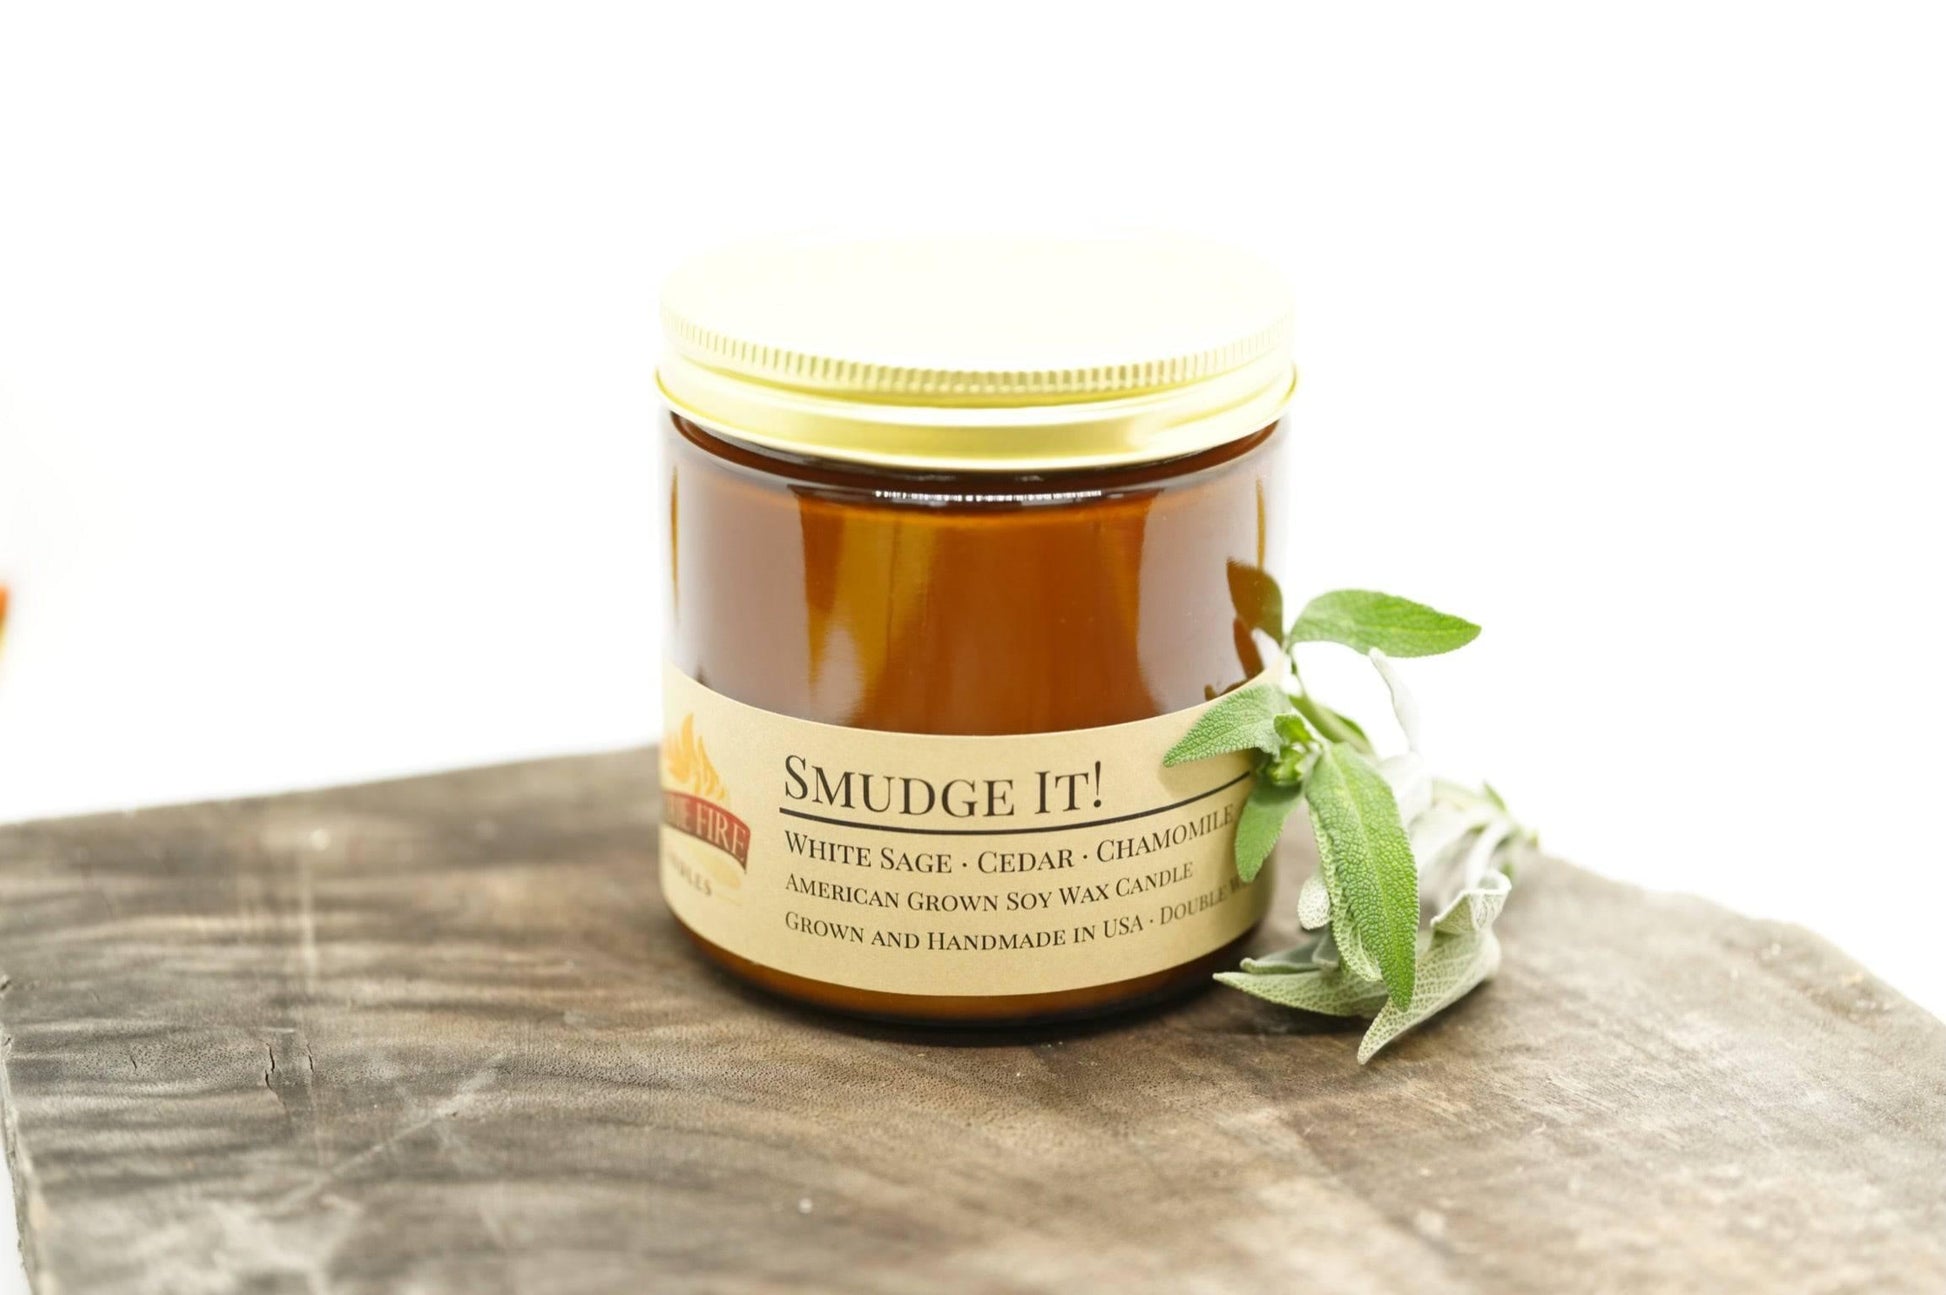 Smudge It! Soy Wax Candle | 16 oz Double Wick Amber Apothecary Jar - Prairie Fire Candles